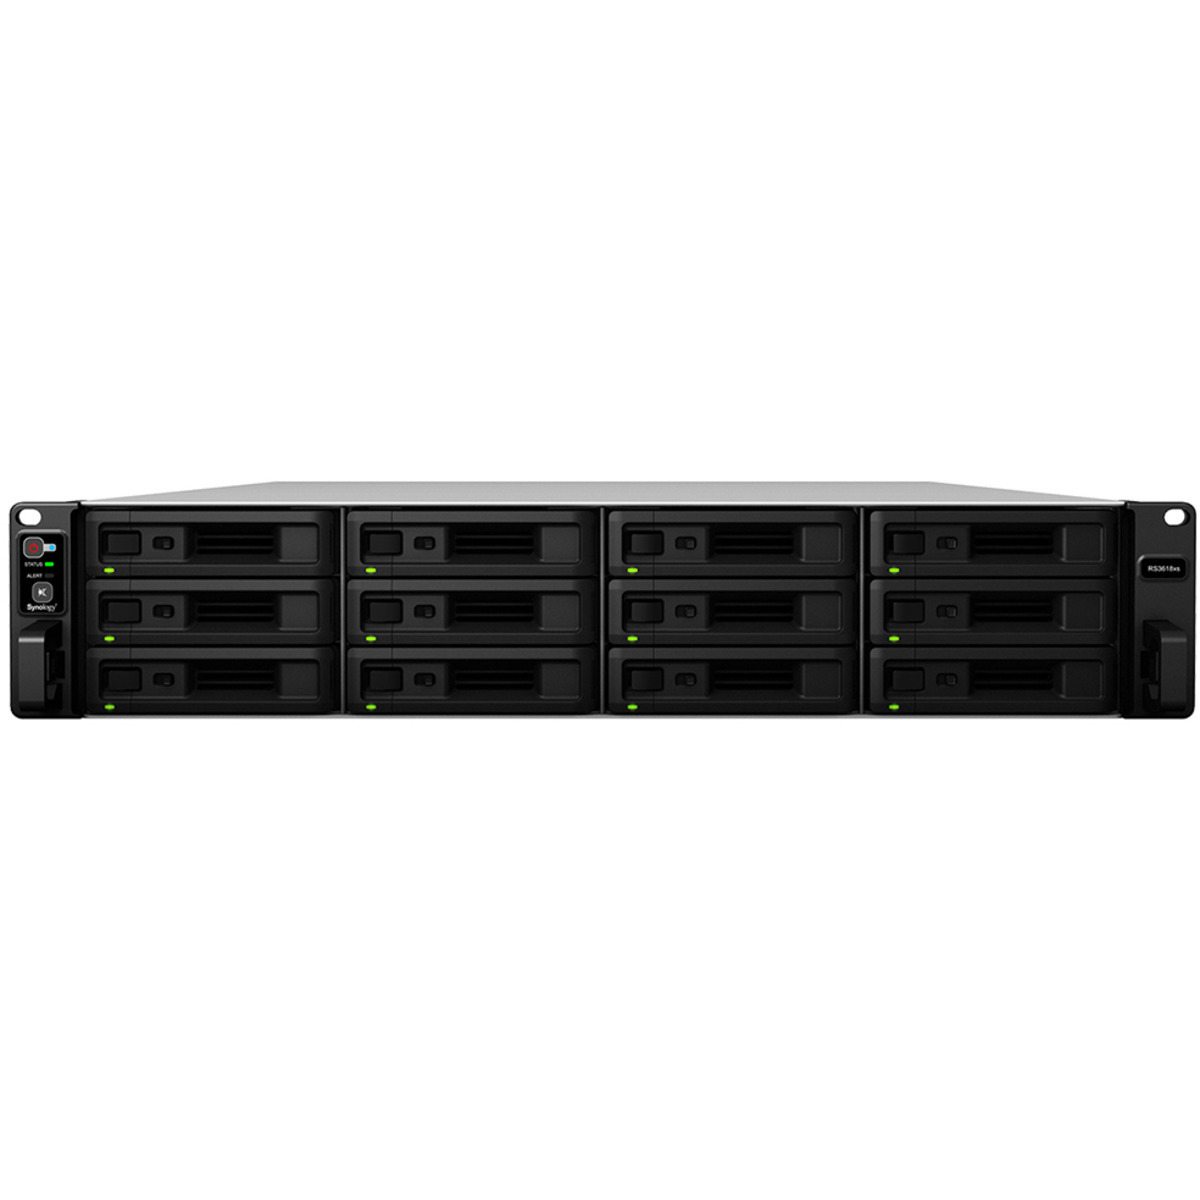 Synology RackStation RS3618xs 72tb 12-Bay RackMount Large Business / Enterprise NAS - Network Attached Storage Device 9x8tb Western Digital Red Plus WD80EFPX 3.5 7200rpm SATA 6Gb/s HDD NAS Class Drives Installed - Burn-In Tested RackStation RS3618xs